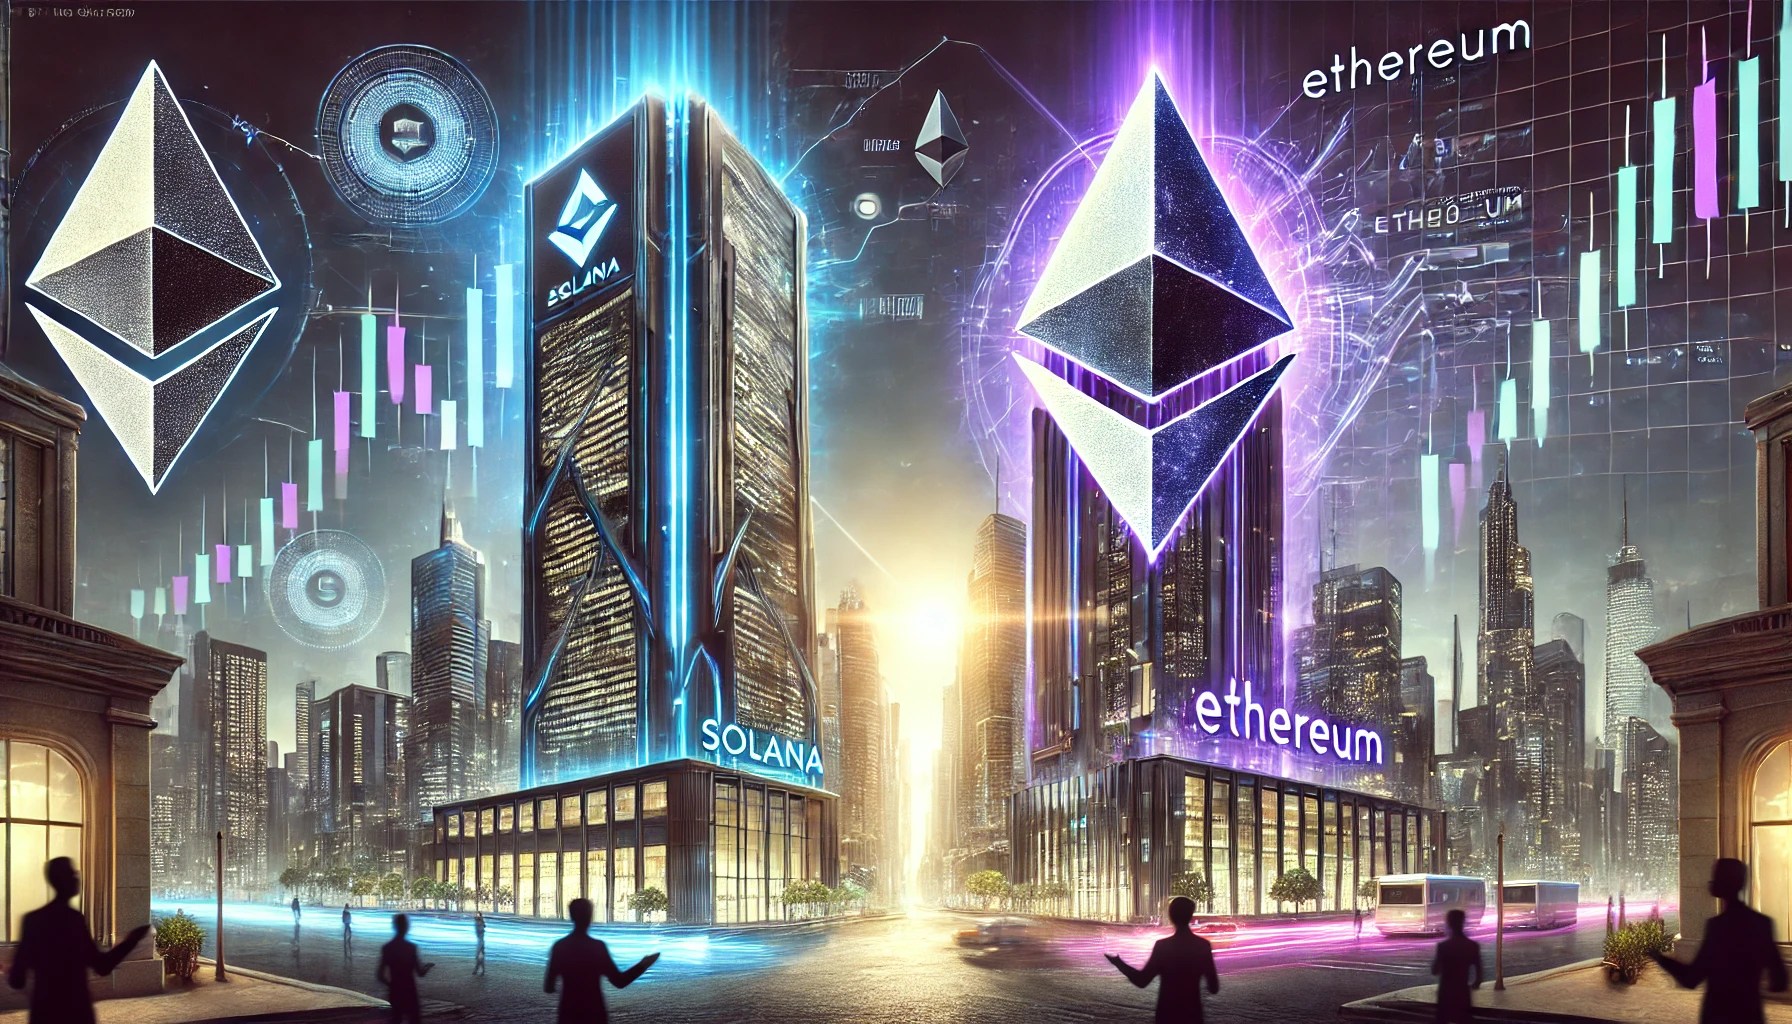 Pantera Capital Researchers Say Solana Will Steal Market Share From Ethereum, Here’s Why